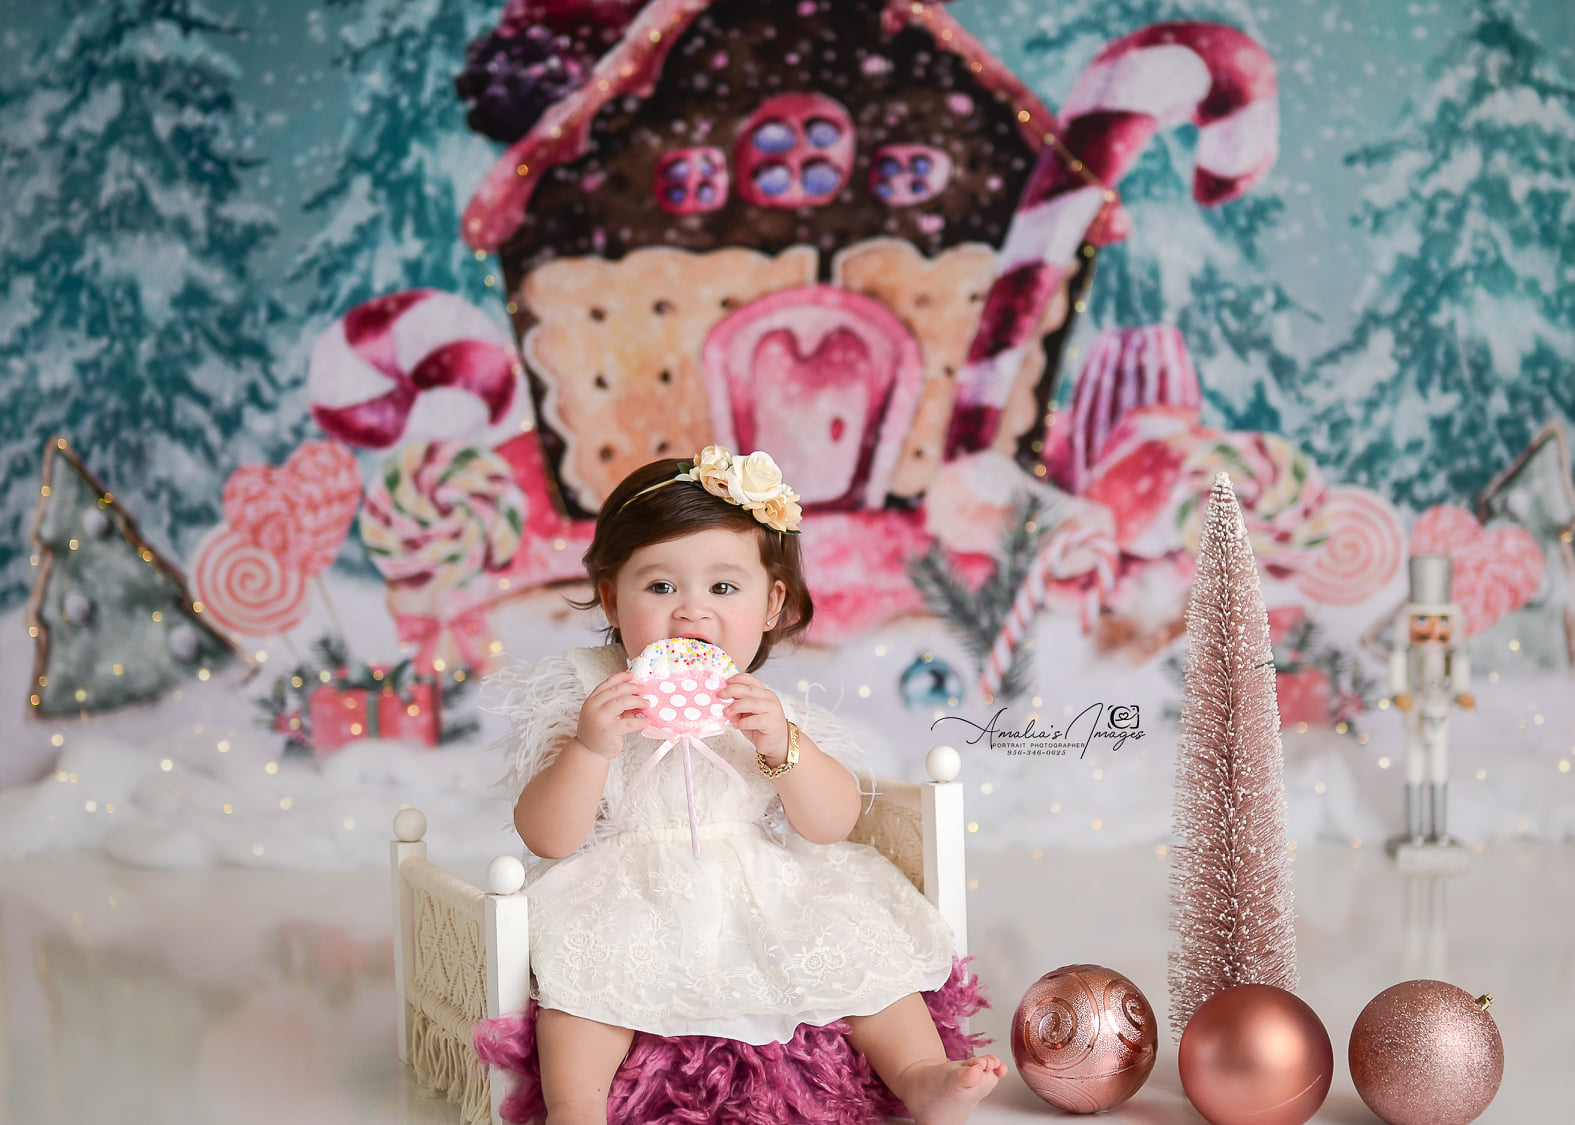 Kate Christmas Sugars Gingerbread Hot Cocoa Backdrop for Photography